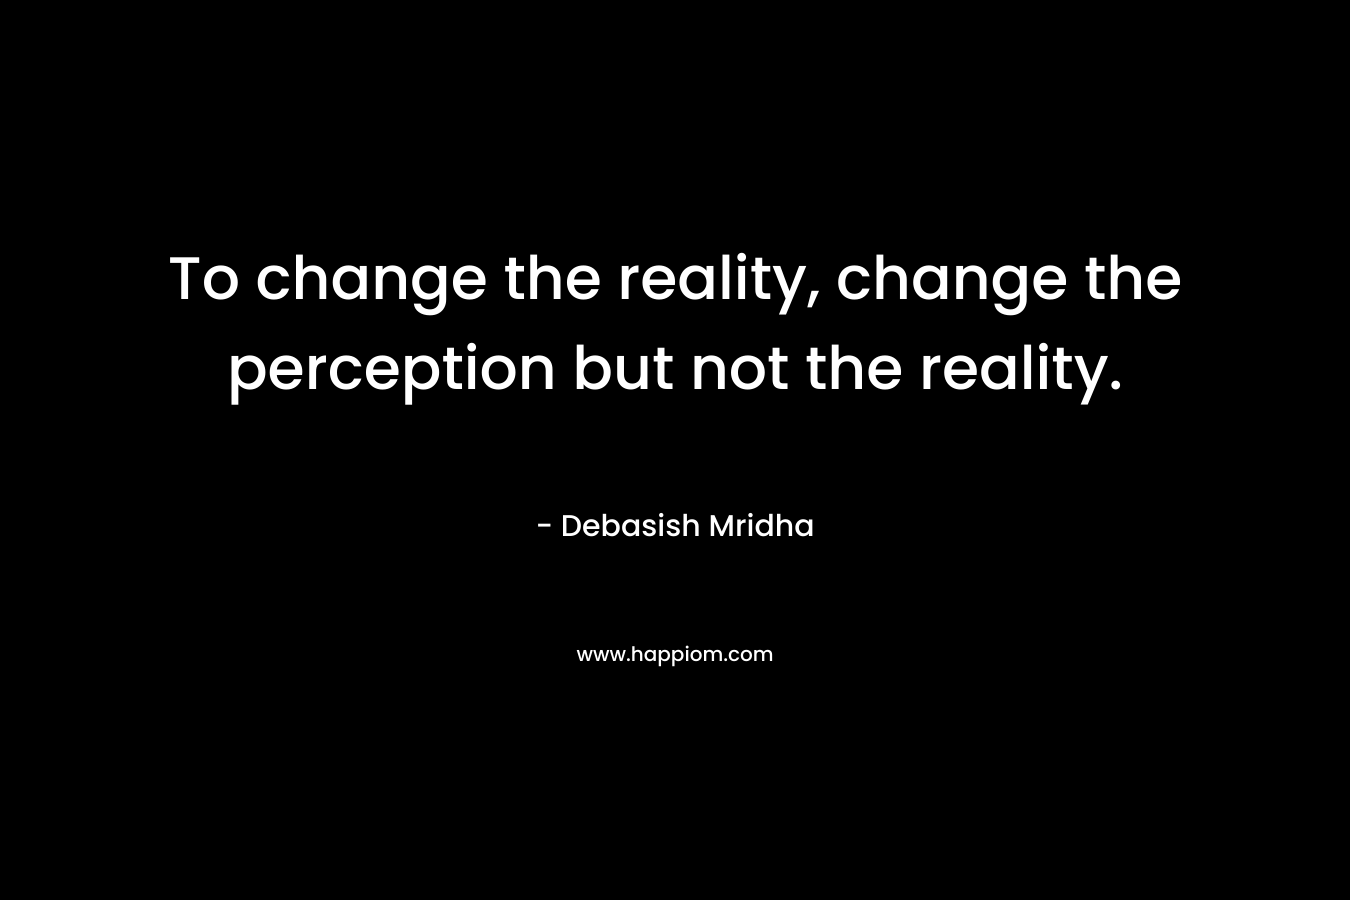 To change the reality, change the perception but not the reality.